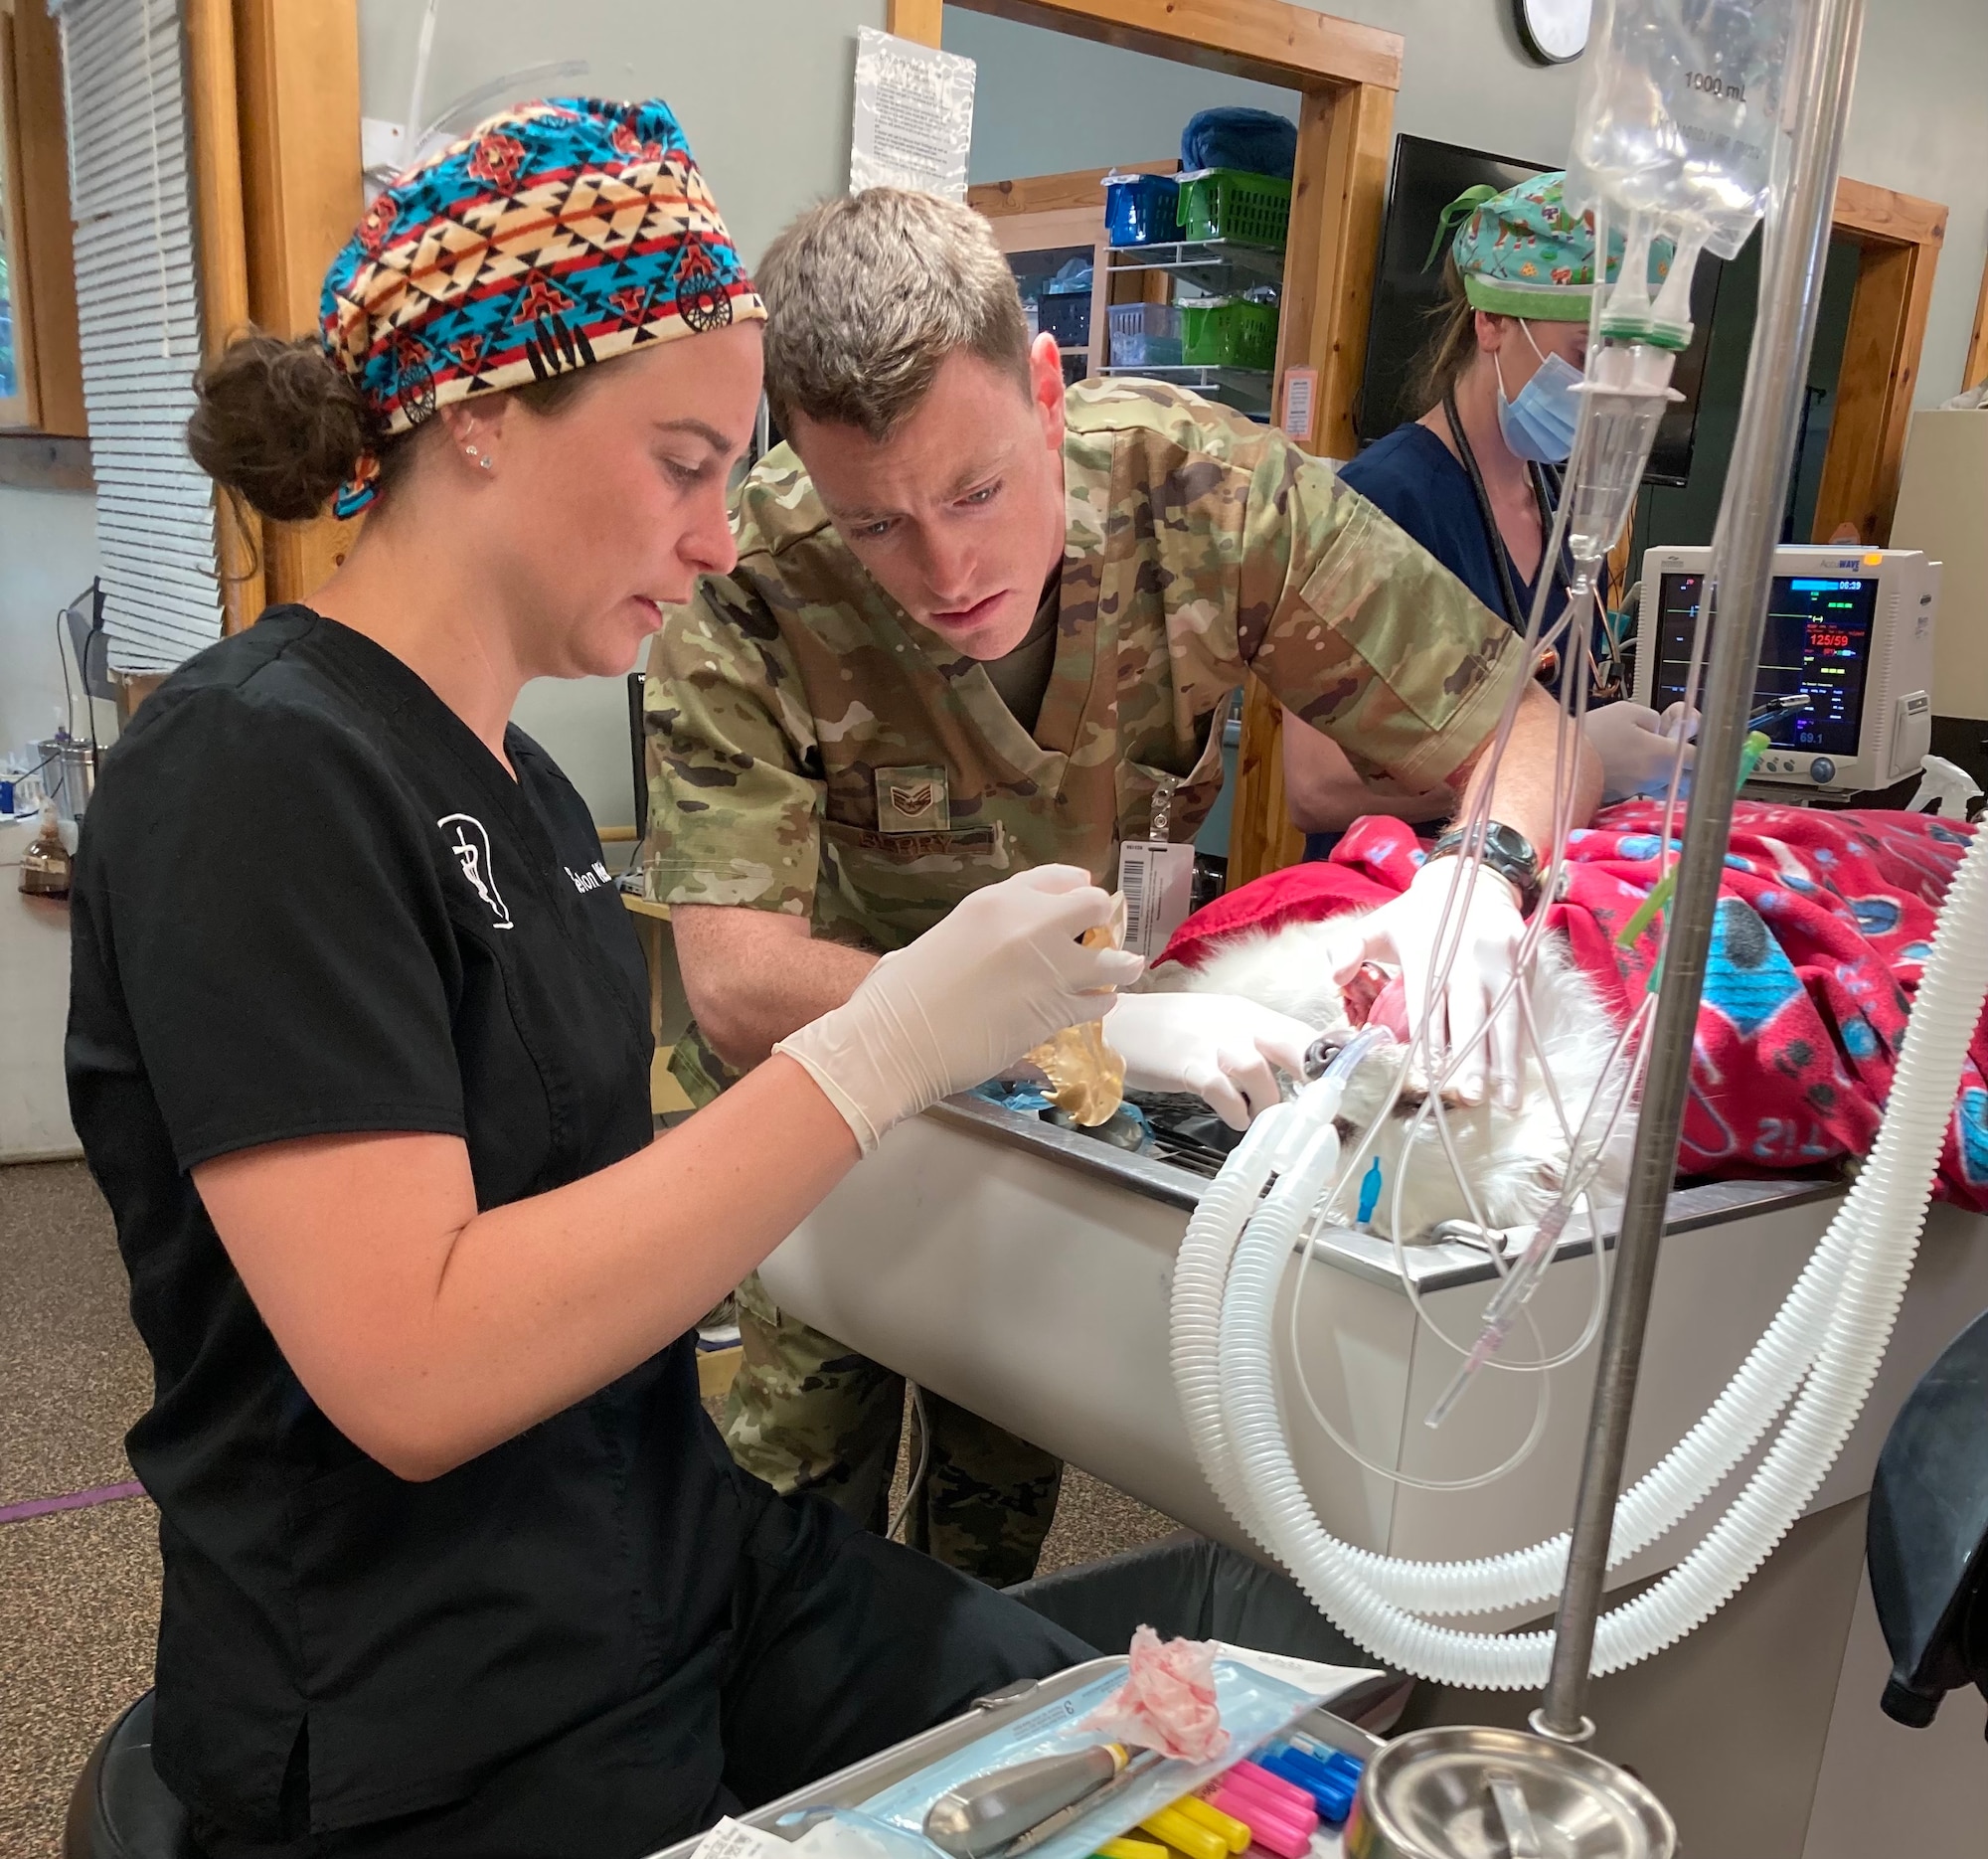 U.S. Air Force Staff Sgt. Michael Berry, 167th Medical Group medic, assists veterinarian Dr. Webb with a canine tooth extraction at Cheat Lake Animal Hospital, Cheat Lake, West Virginia, May 19, 2022. Berry along with four other 167th MDG medics received training through J.W. Ruby Memorial Hospital and Cheat Lake Animal Hospital.